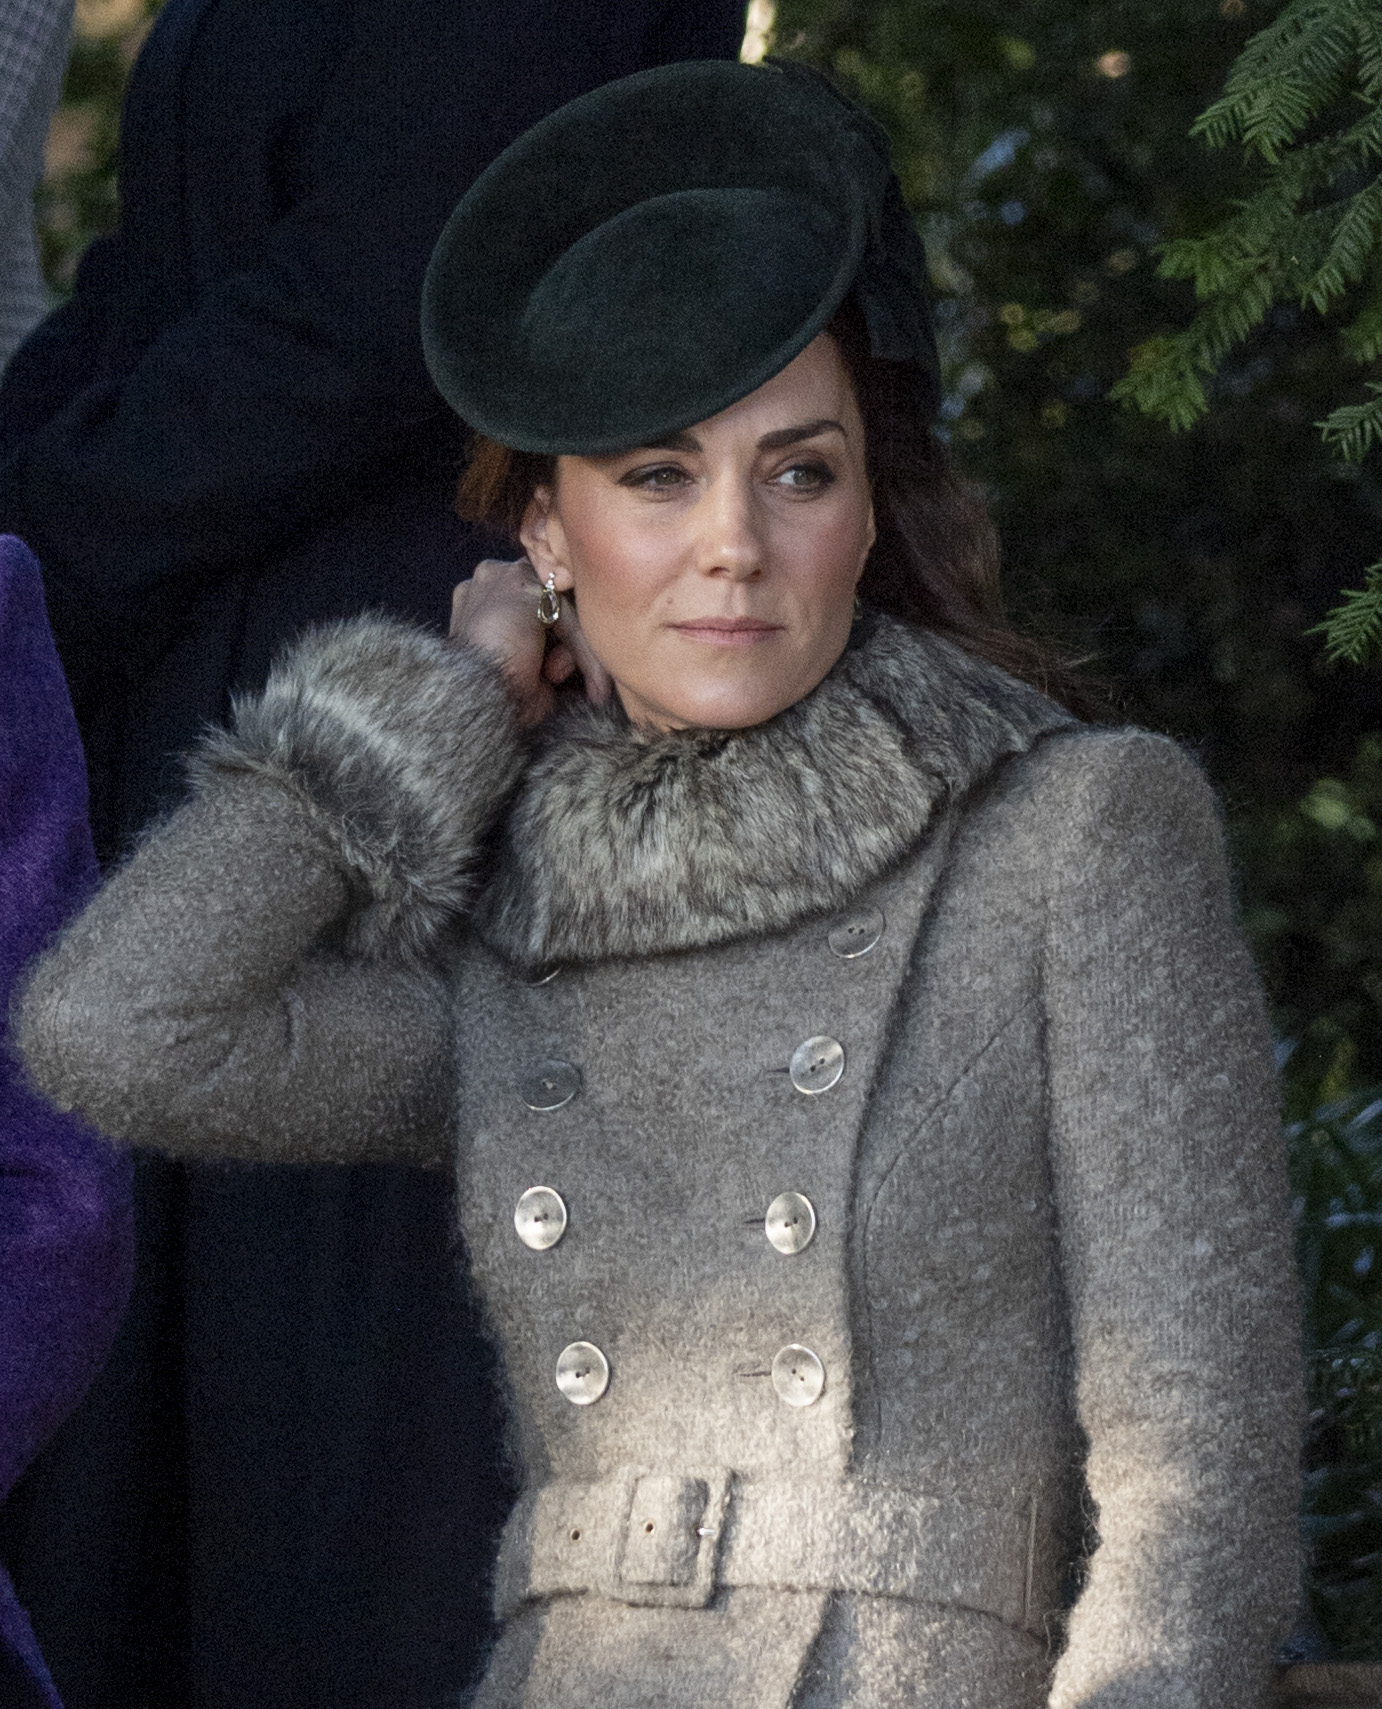 Kate Middleton photographed on Christmas Day outside the Church of St. Mary Magdalene